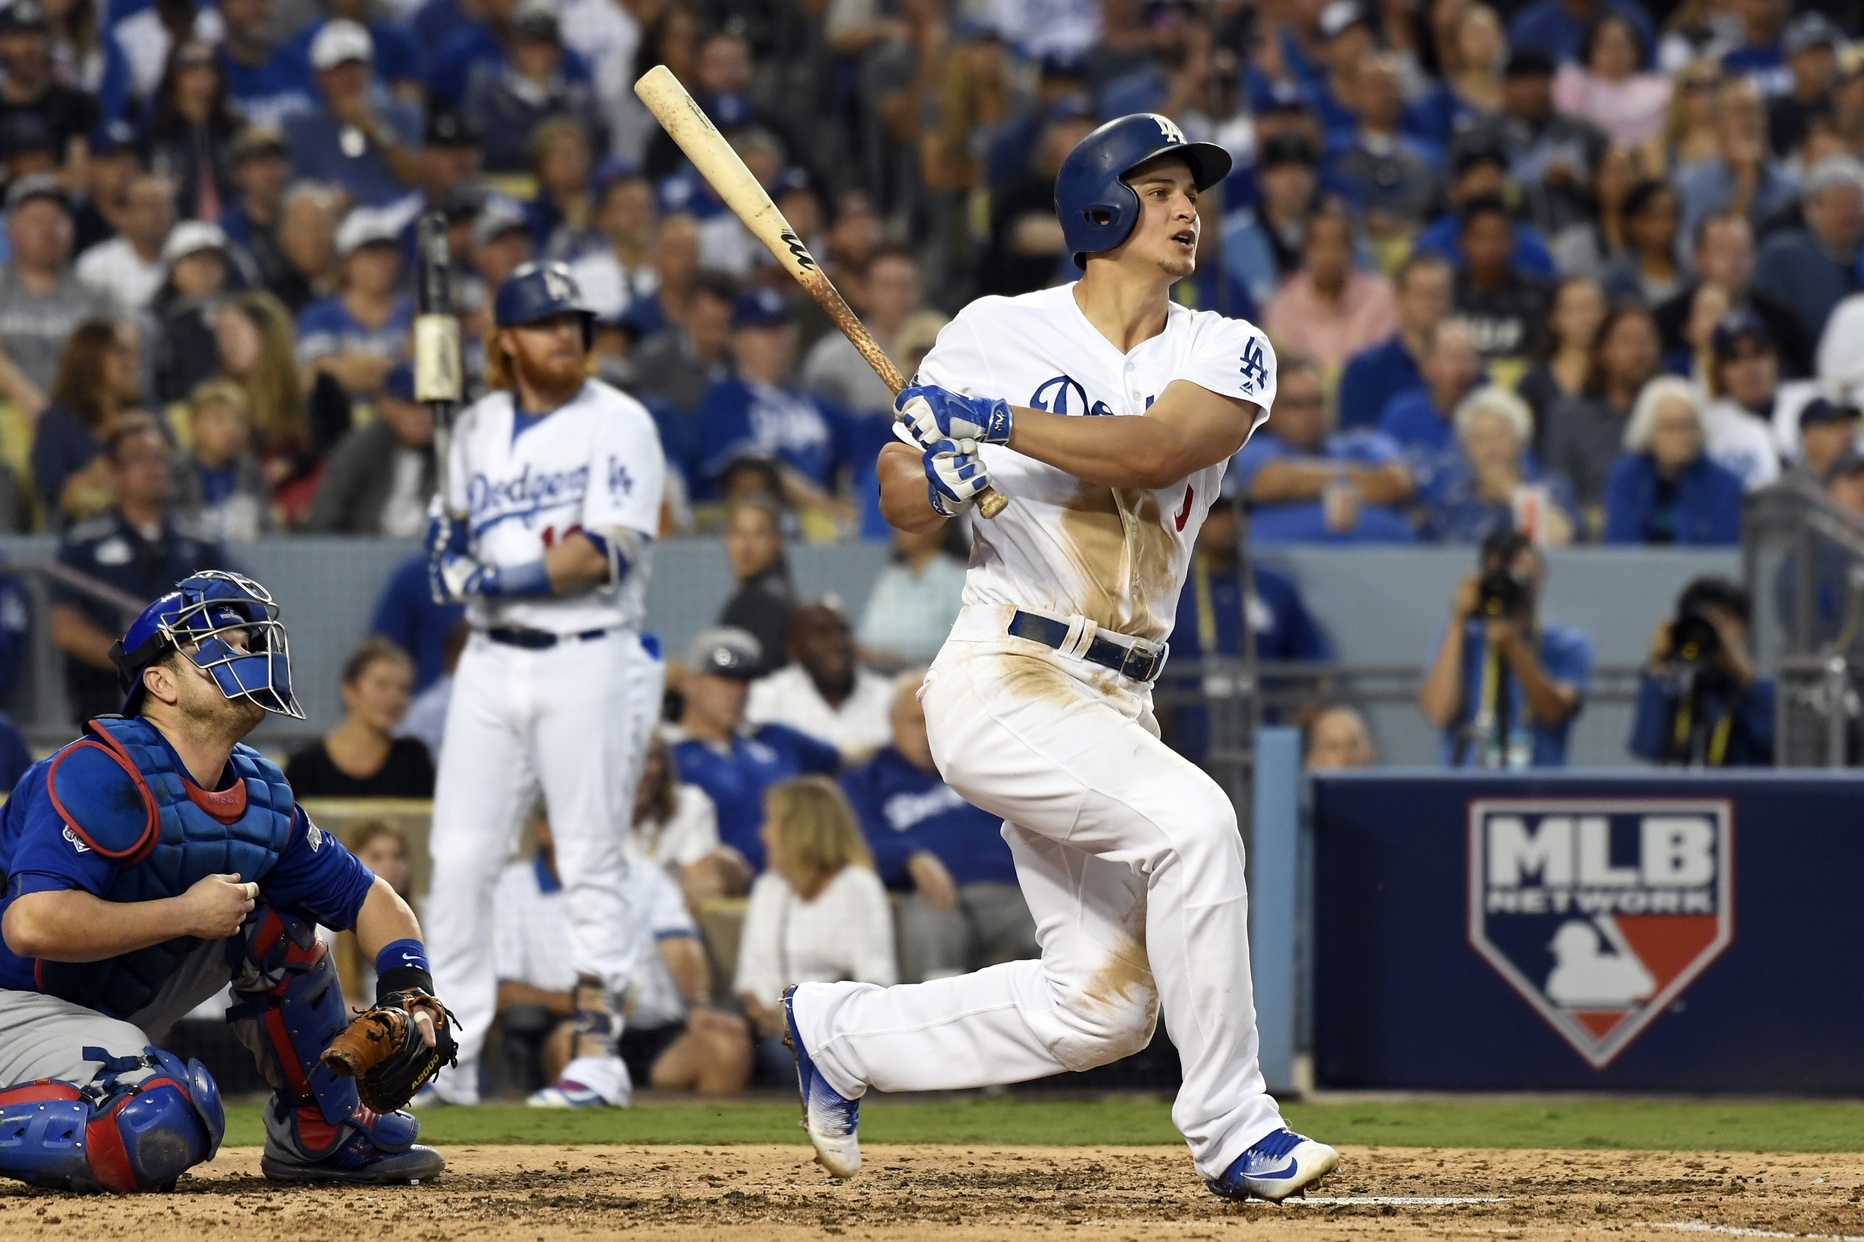 How Corey Seager Became One Of Baseball's Best-Hitting Shortstops